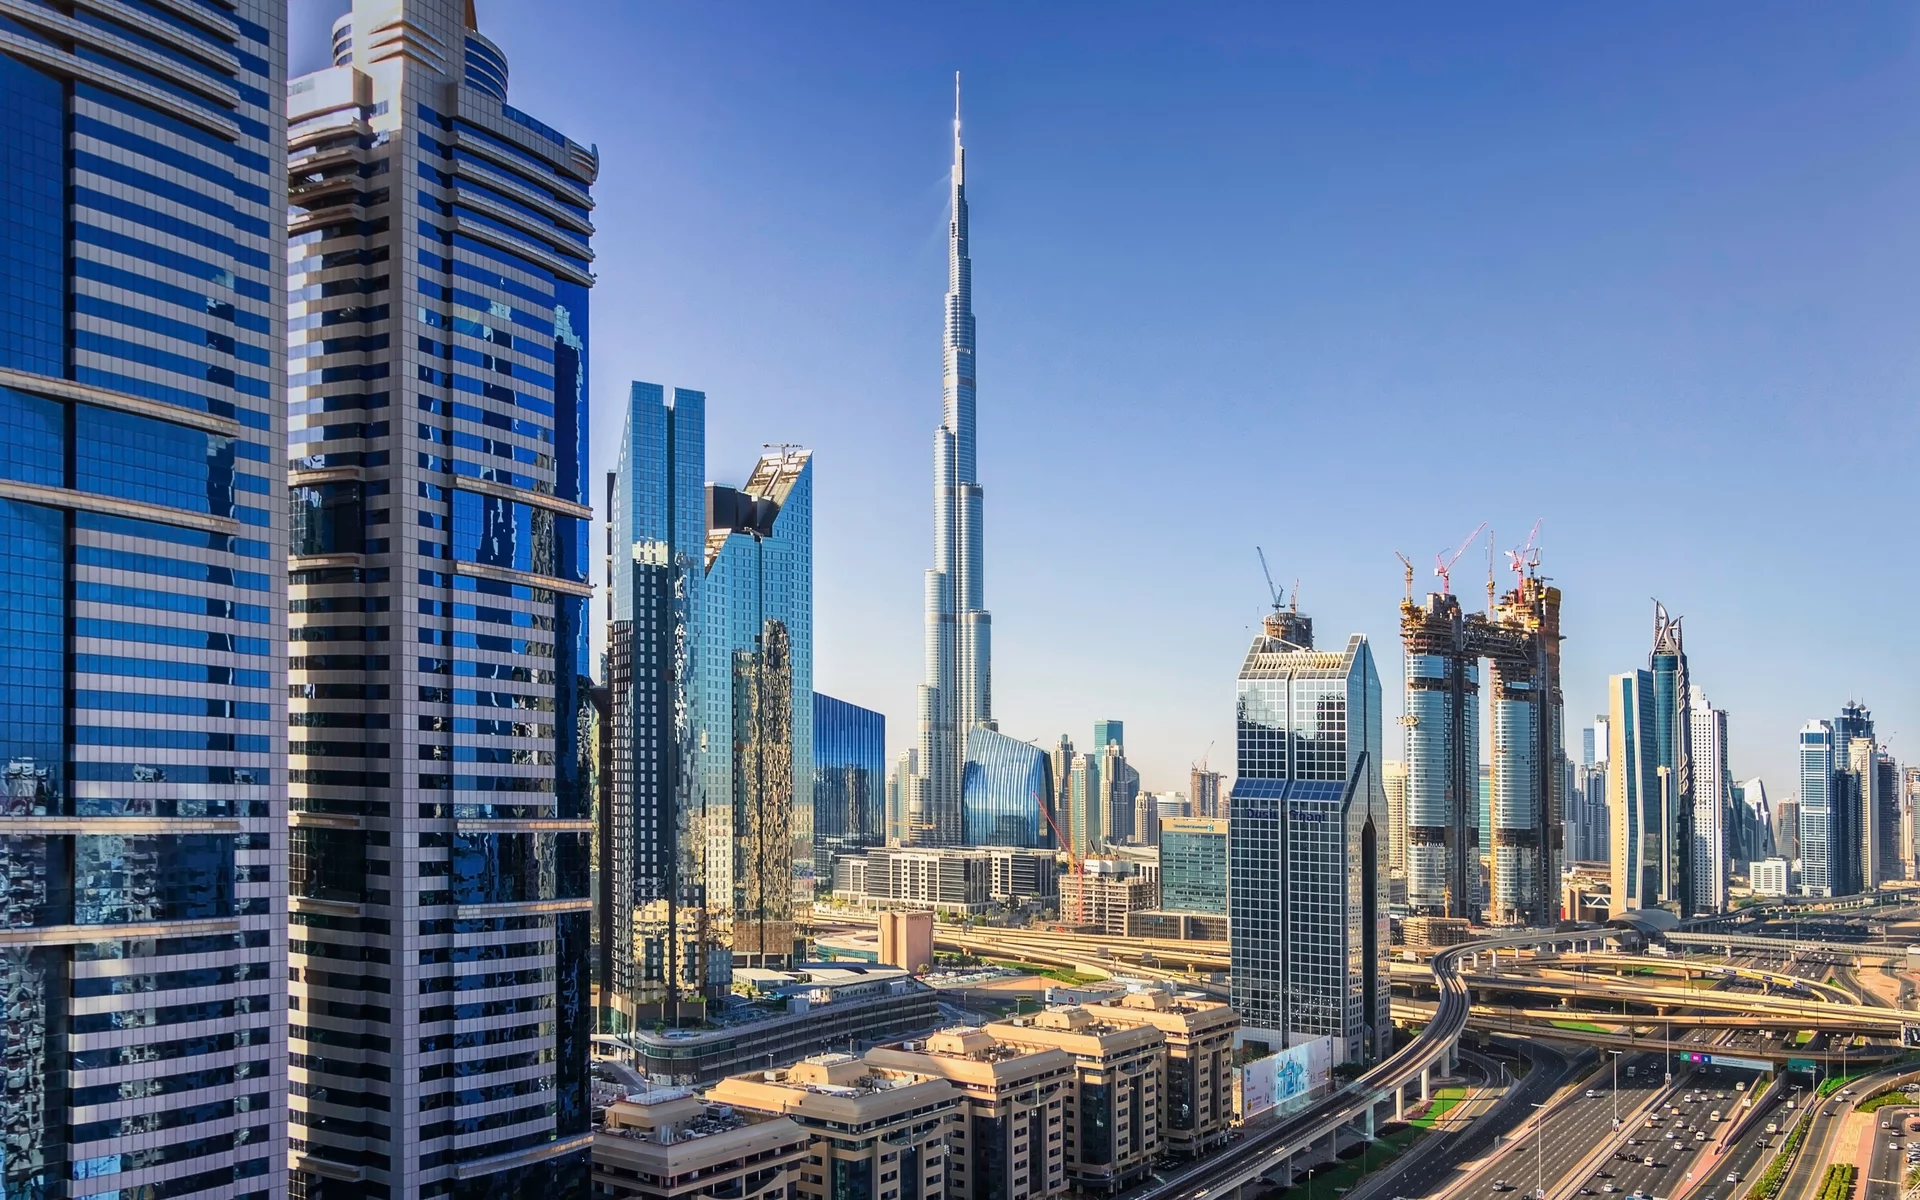 How much does a good house cost in Dubai?